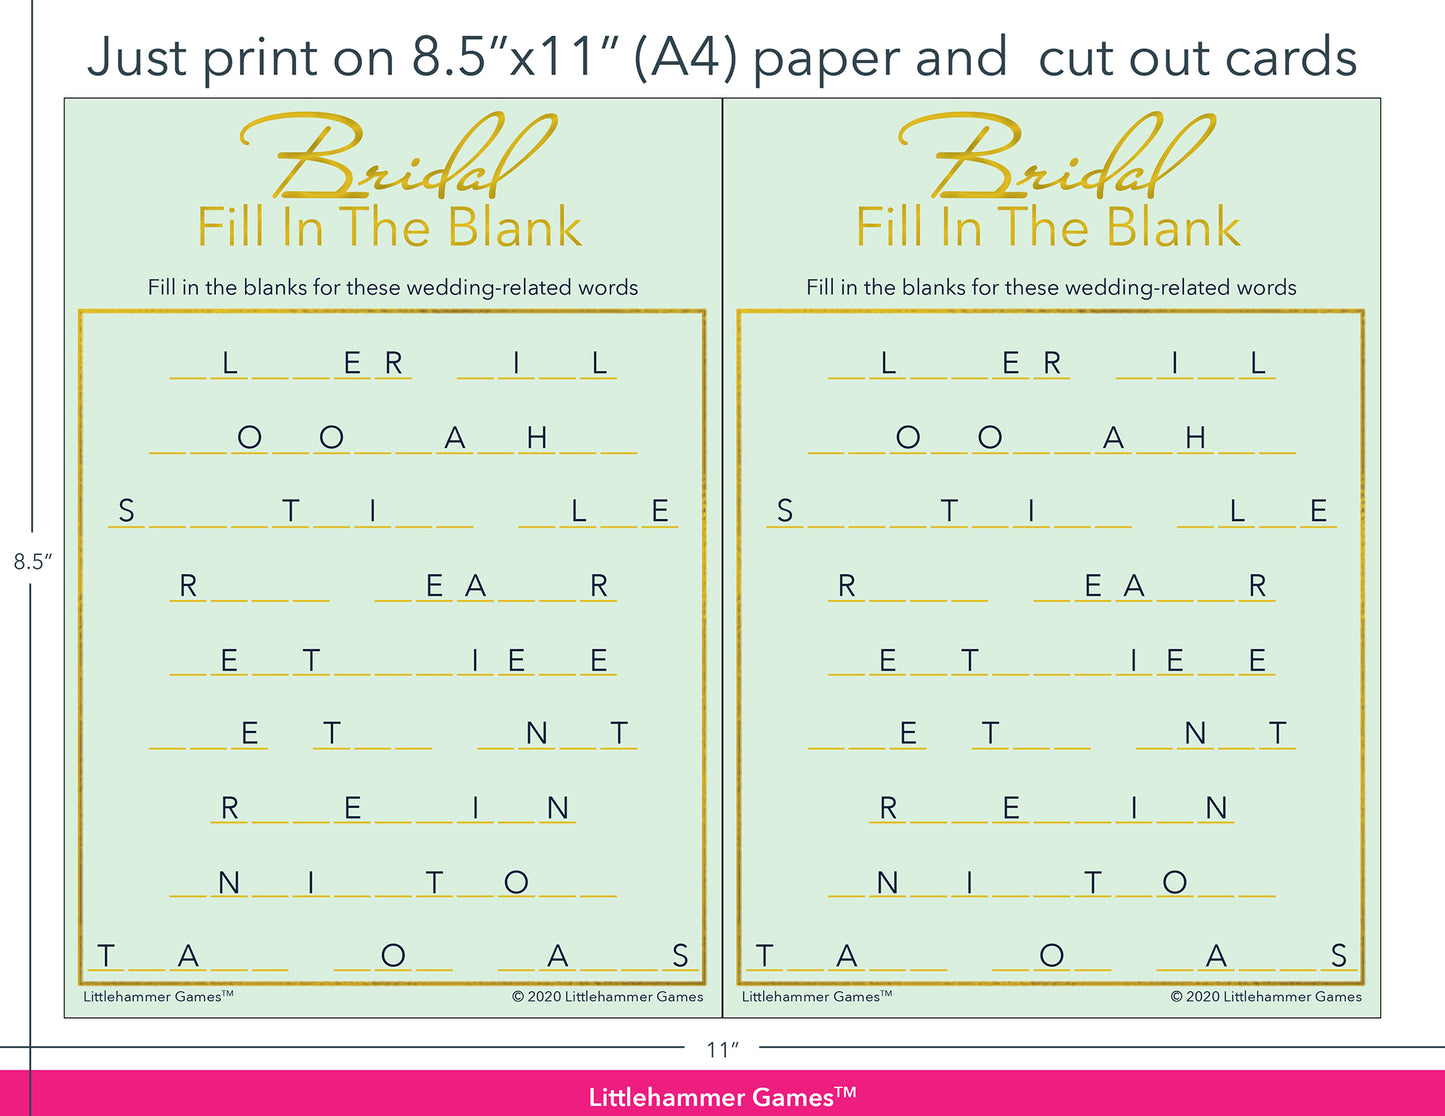 Bridal Fill in the Blank mint and gold game cards with printing instructions